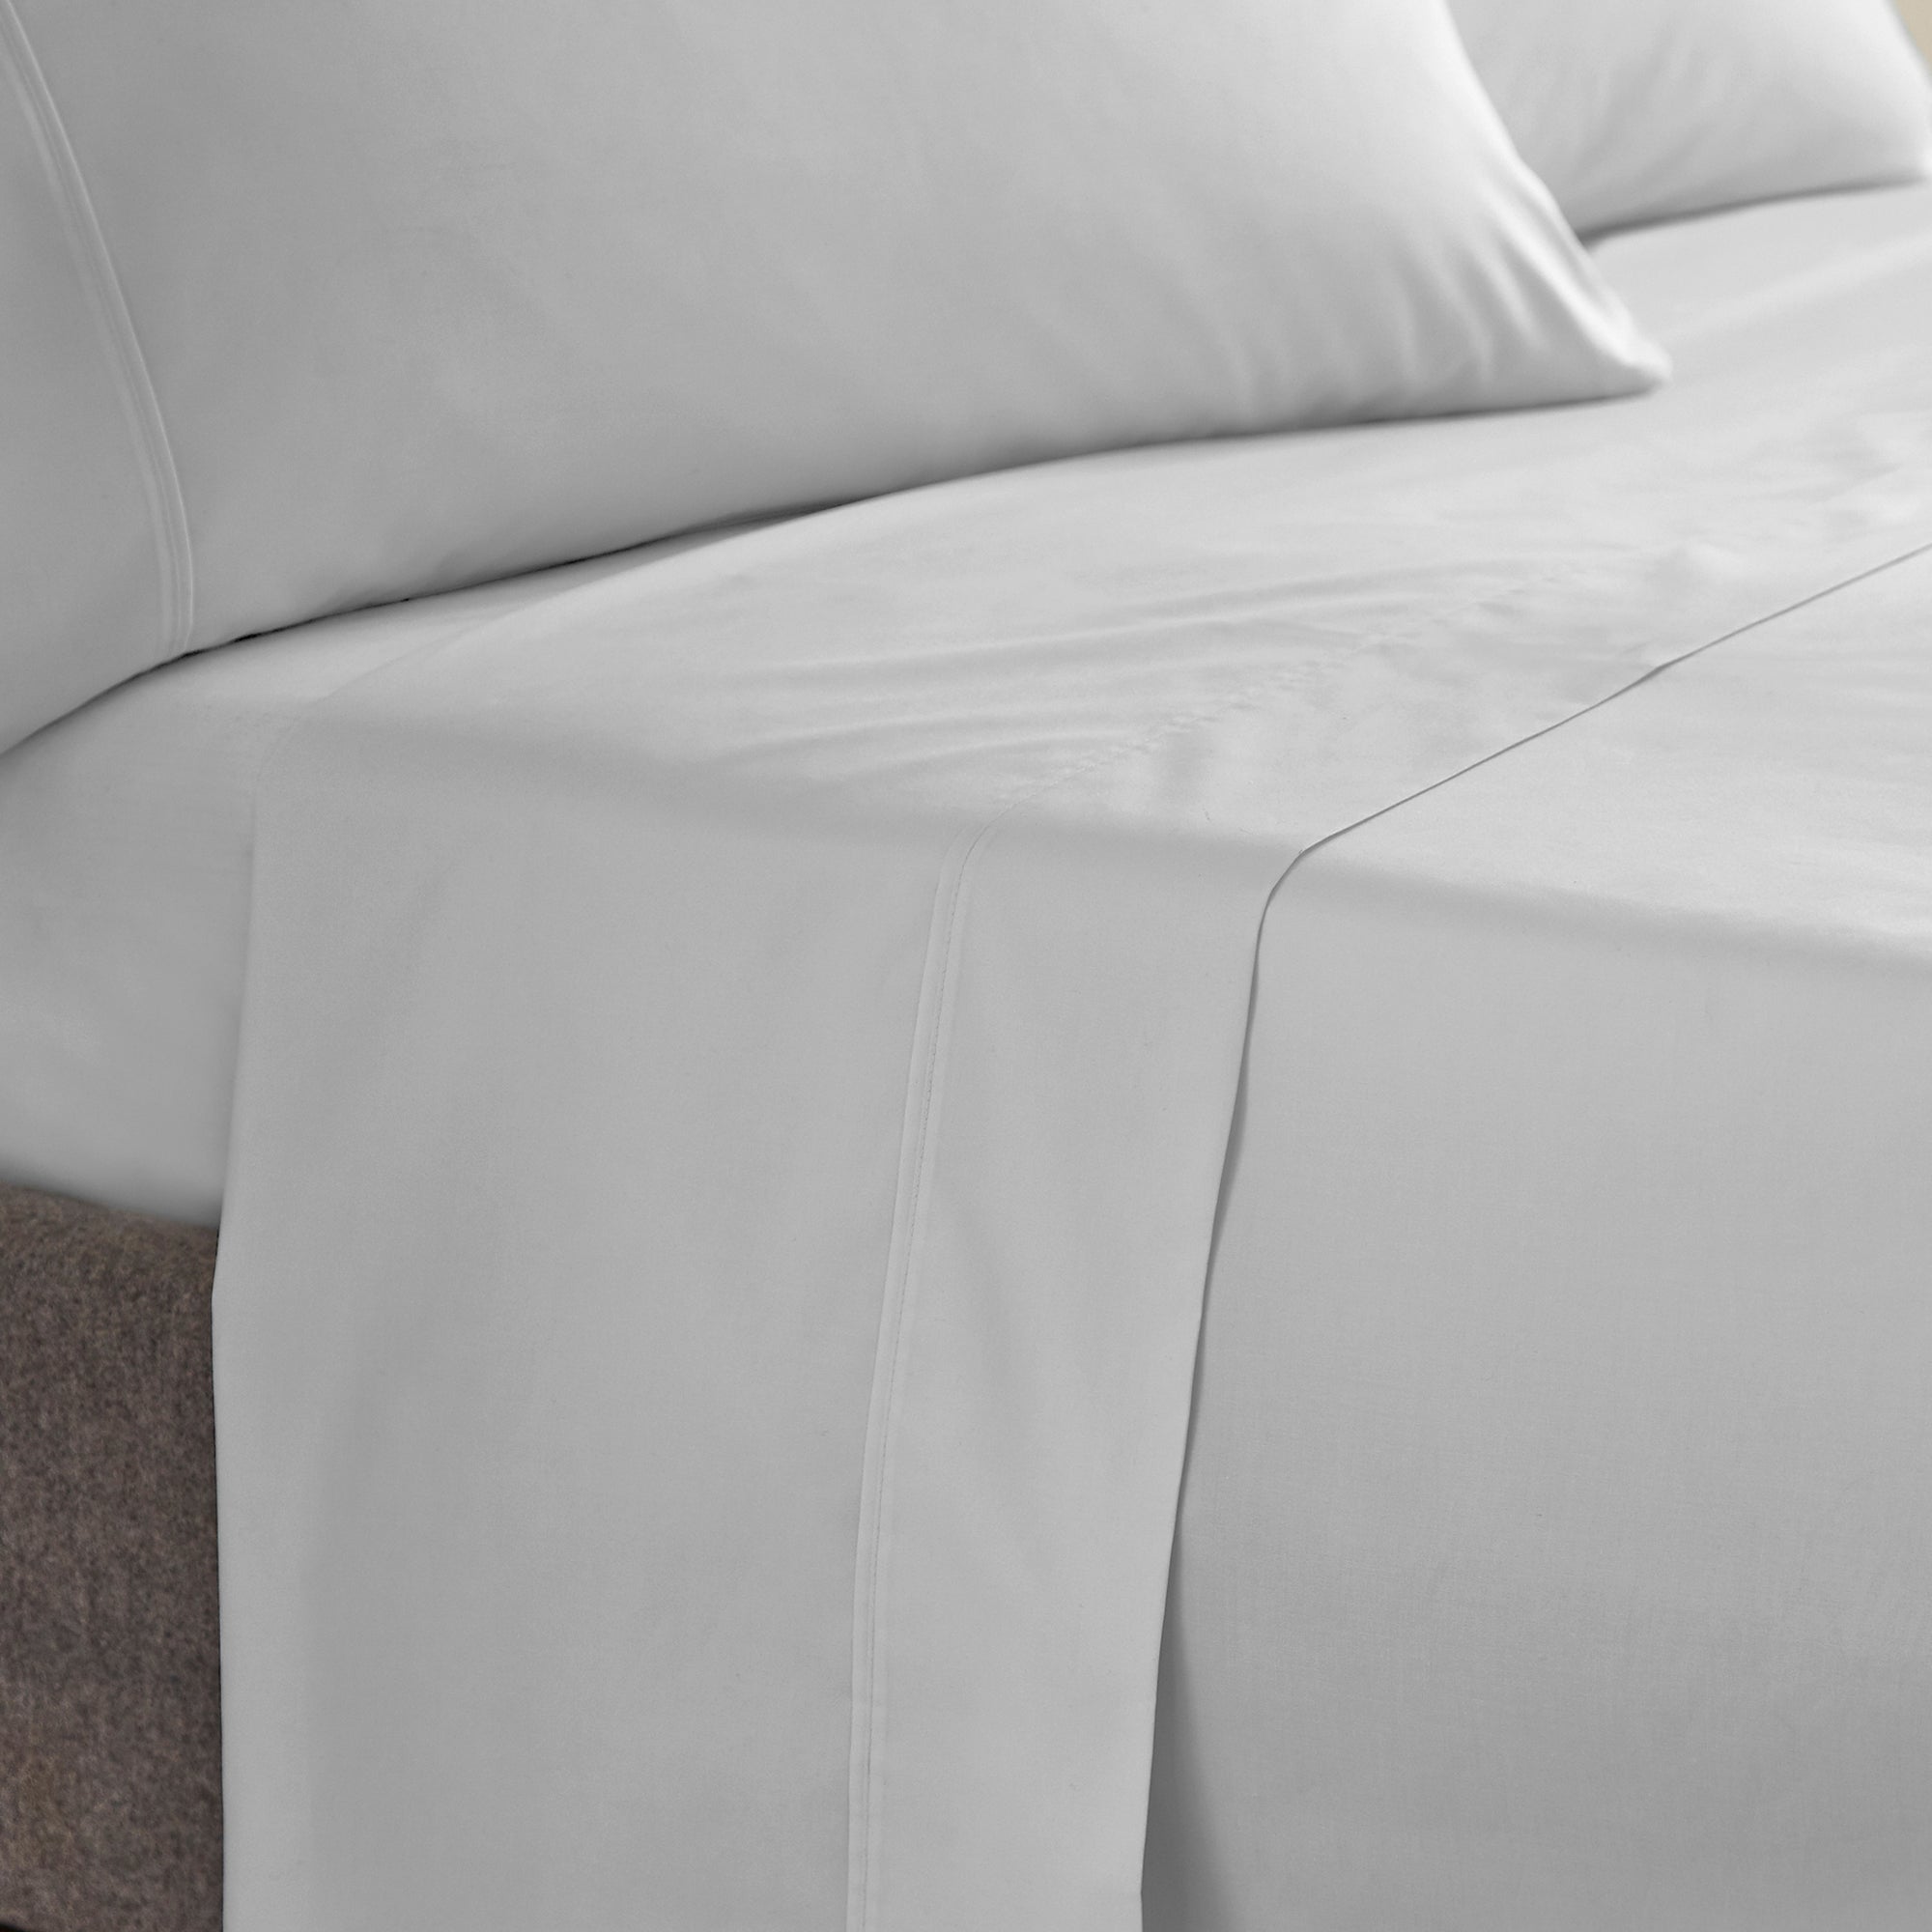 Photo of Dorma egyptian cotton 400 thread count percale flat sheet silver